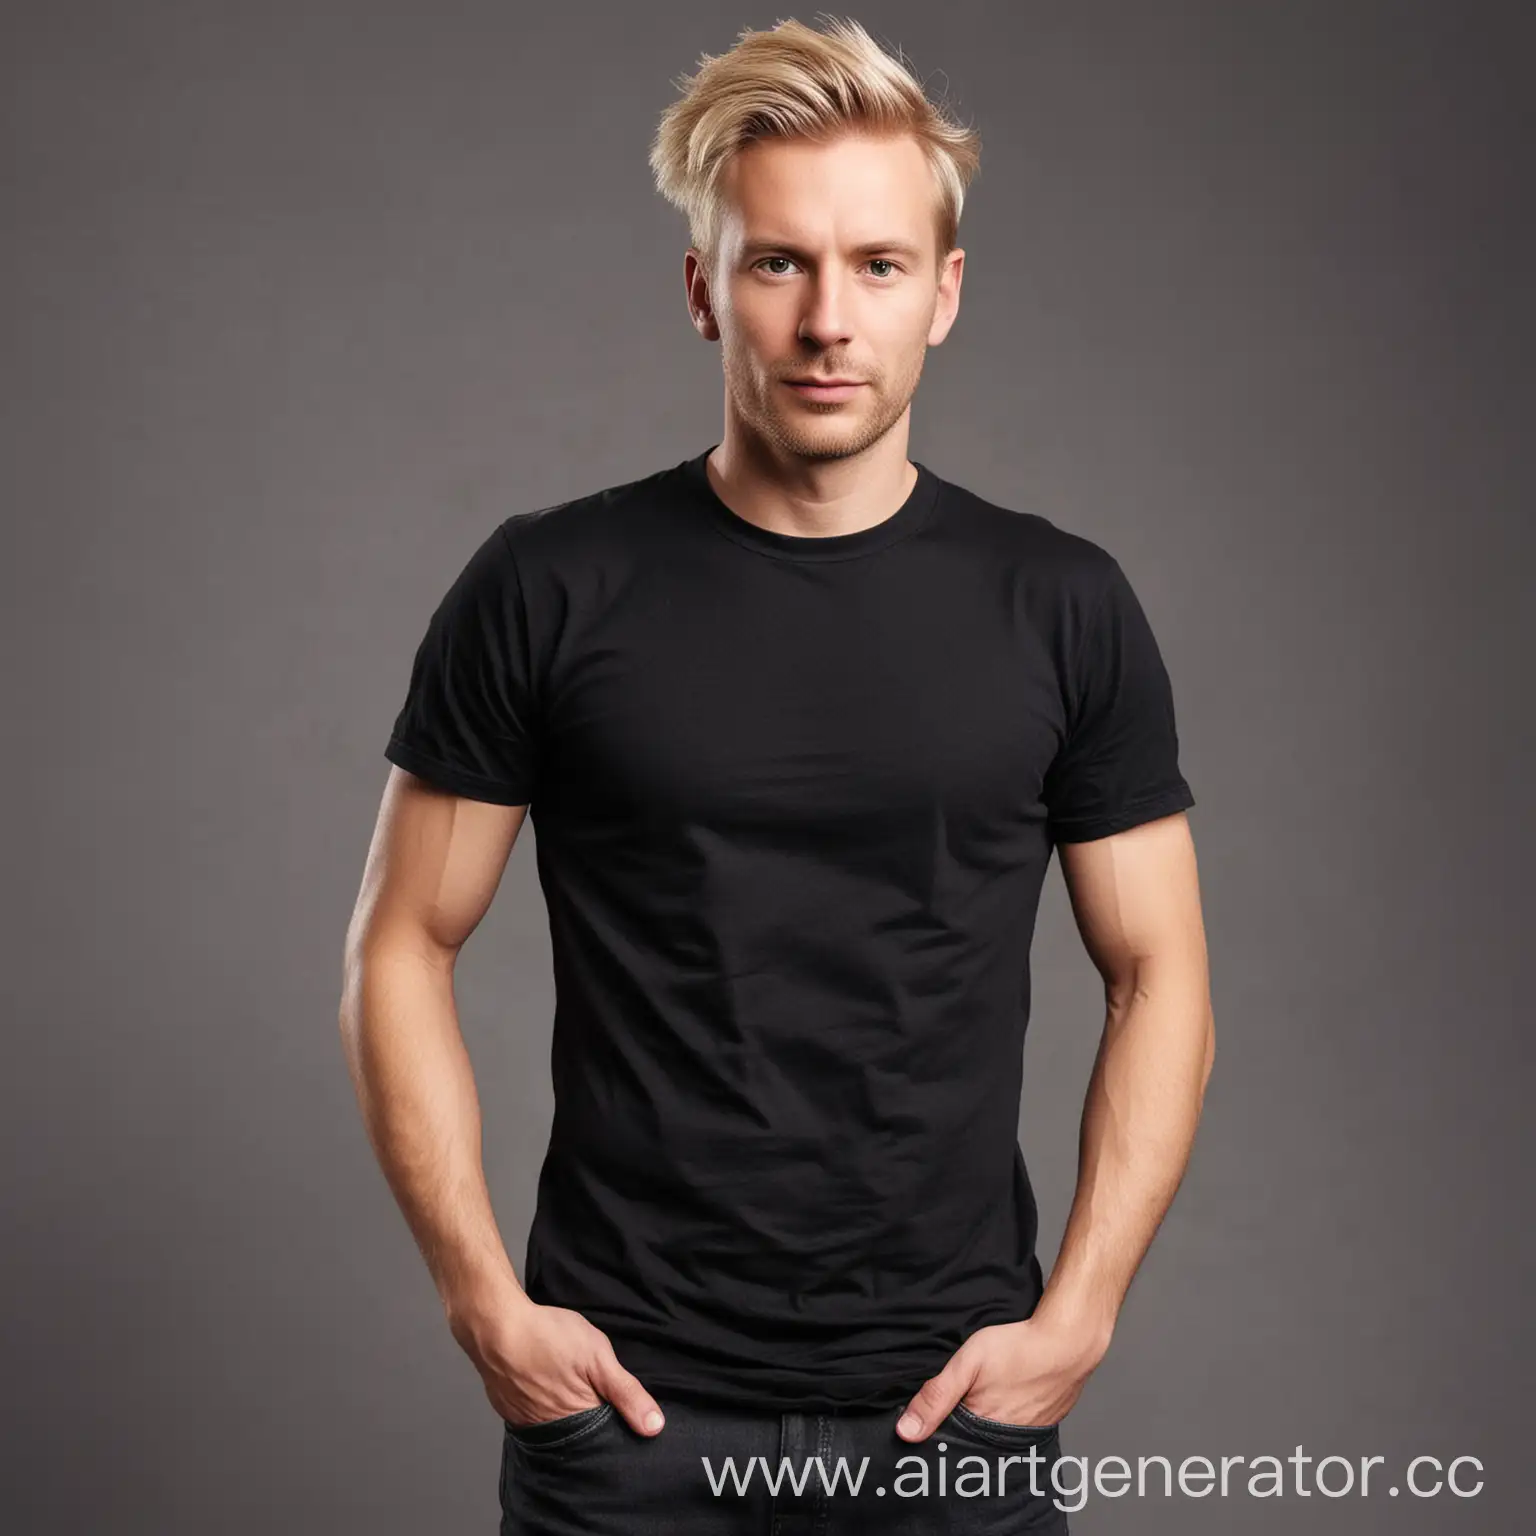 FairHaired-Man-in-Black-TShirt-on-Gray-Background